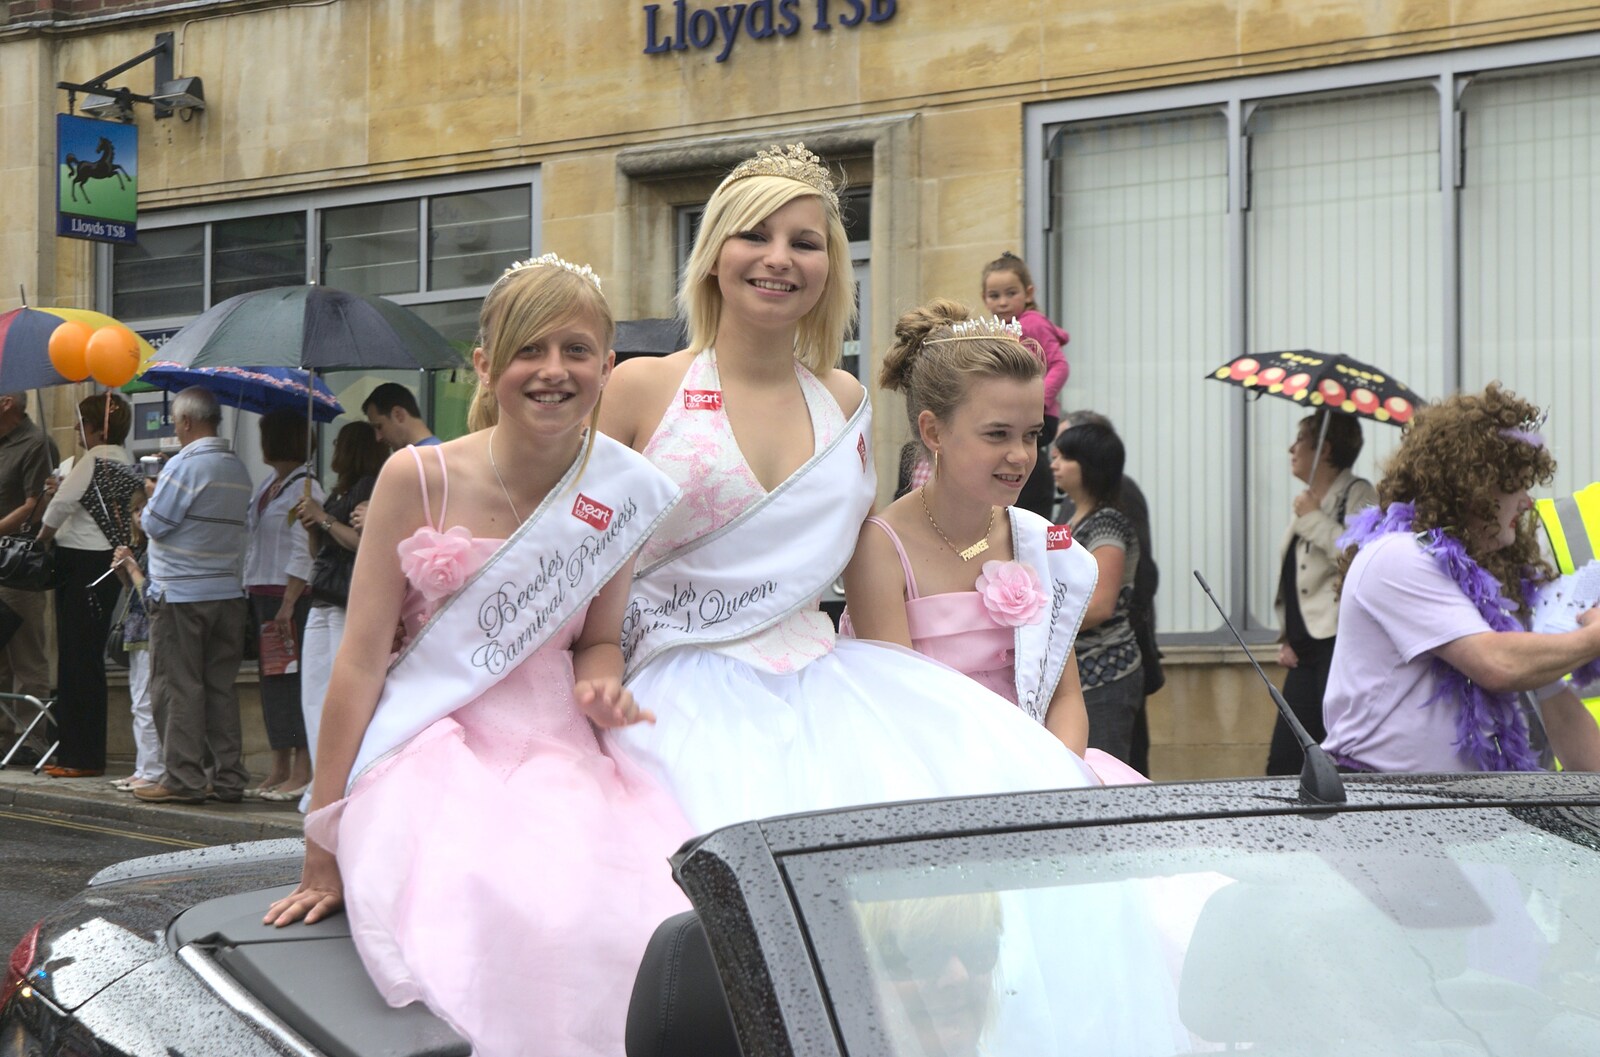 The Beccles carnival queen and princesses from Diss Carnival Procession, Diss, Norfolk - 21st June 2009